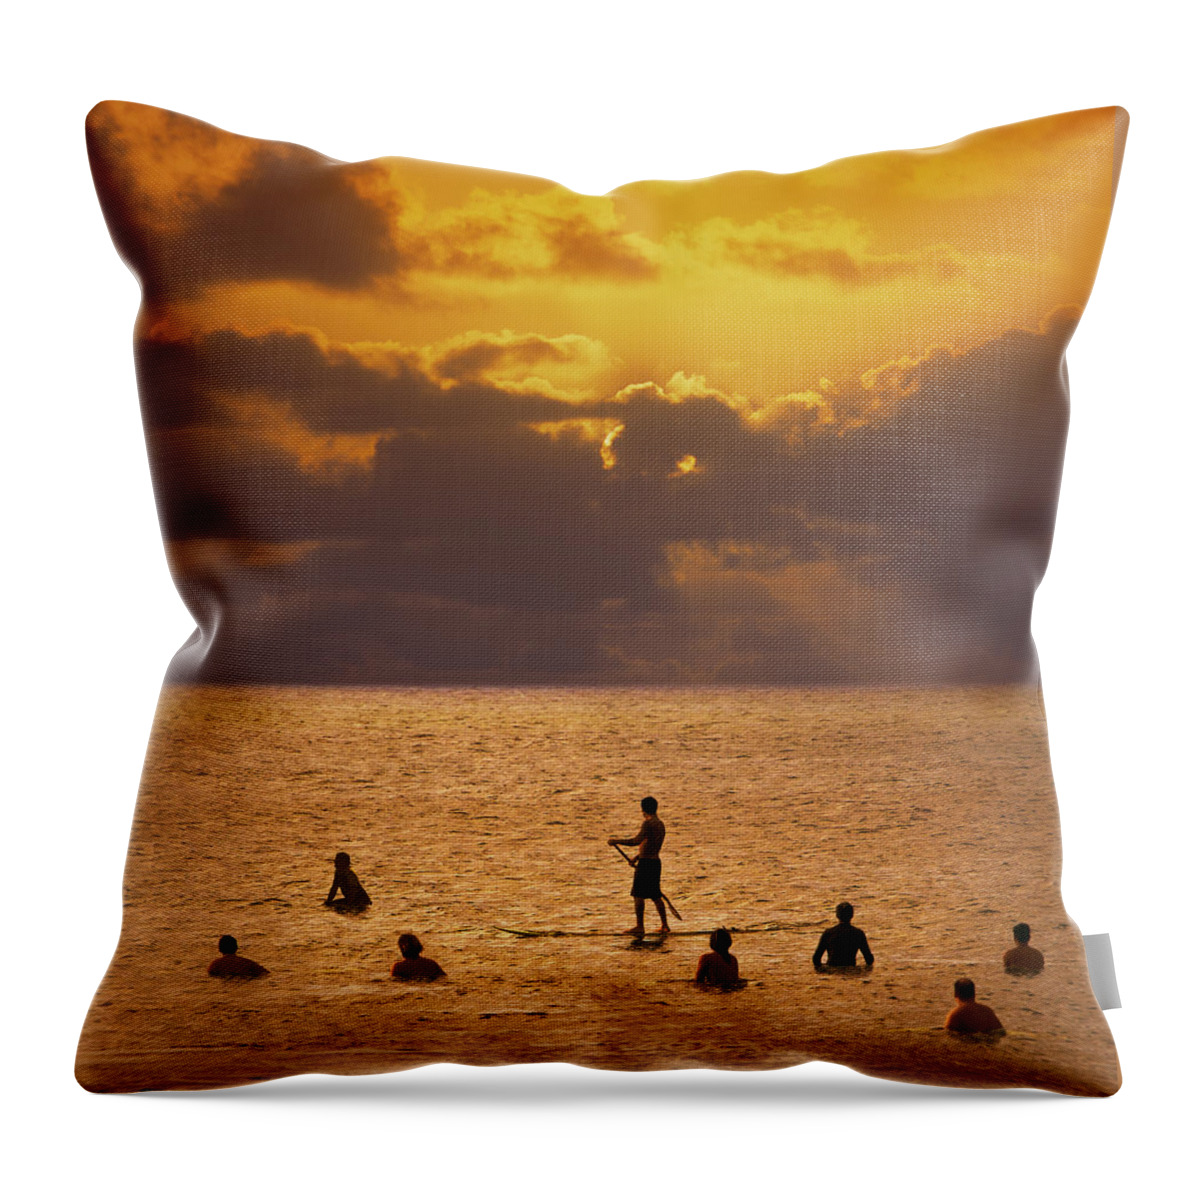 People Throw Pillow featuring the photograph Silhouette Of Surfers In Sea, Rear View by Ed Freeman